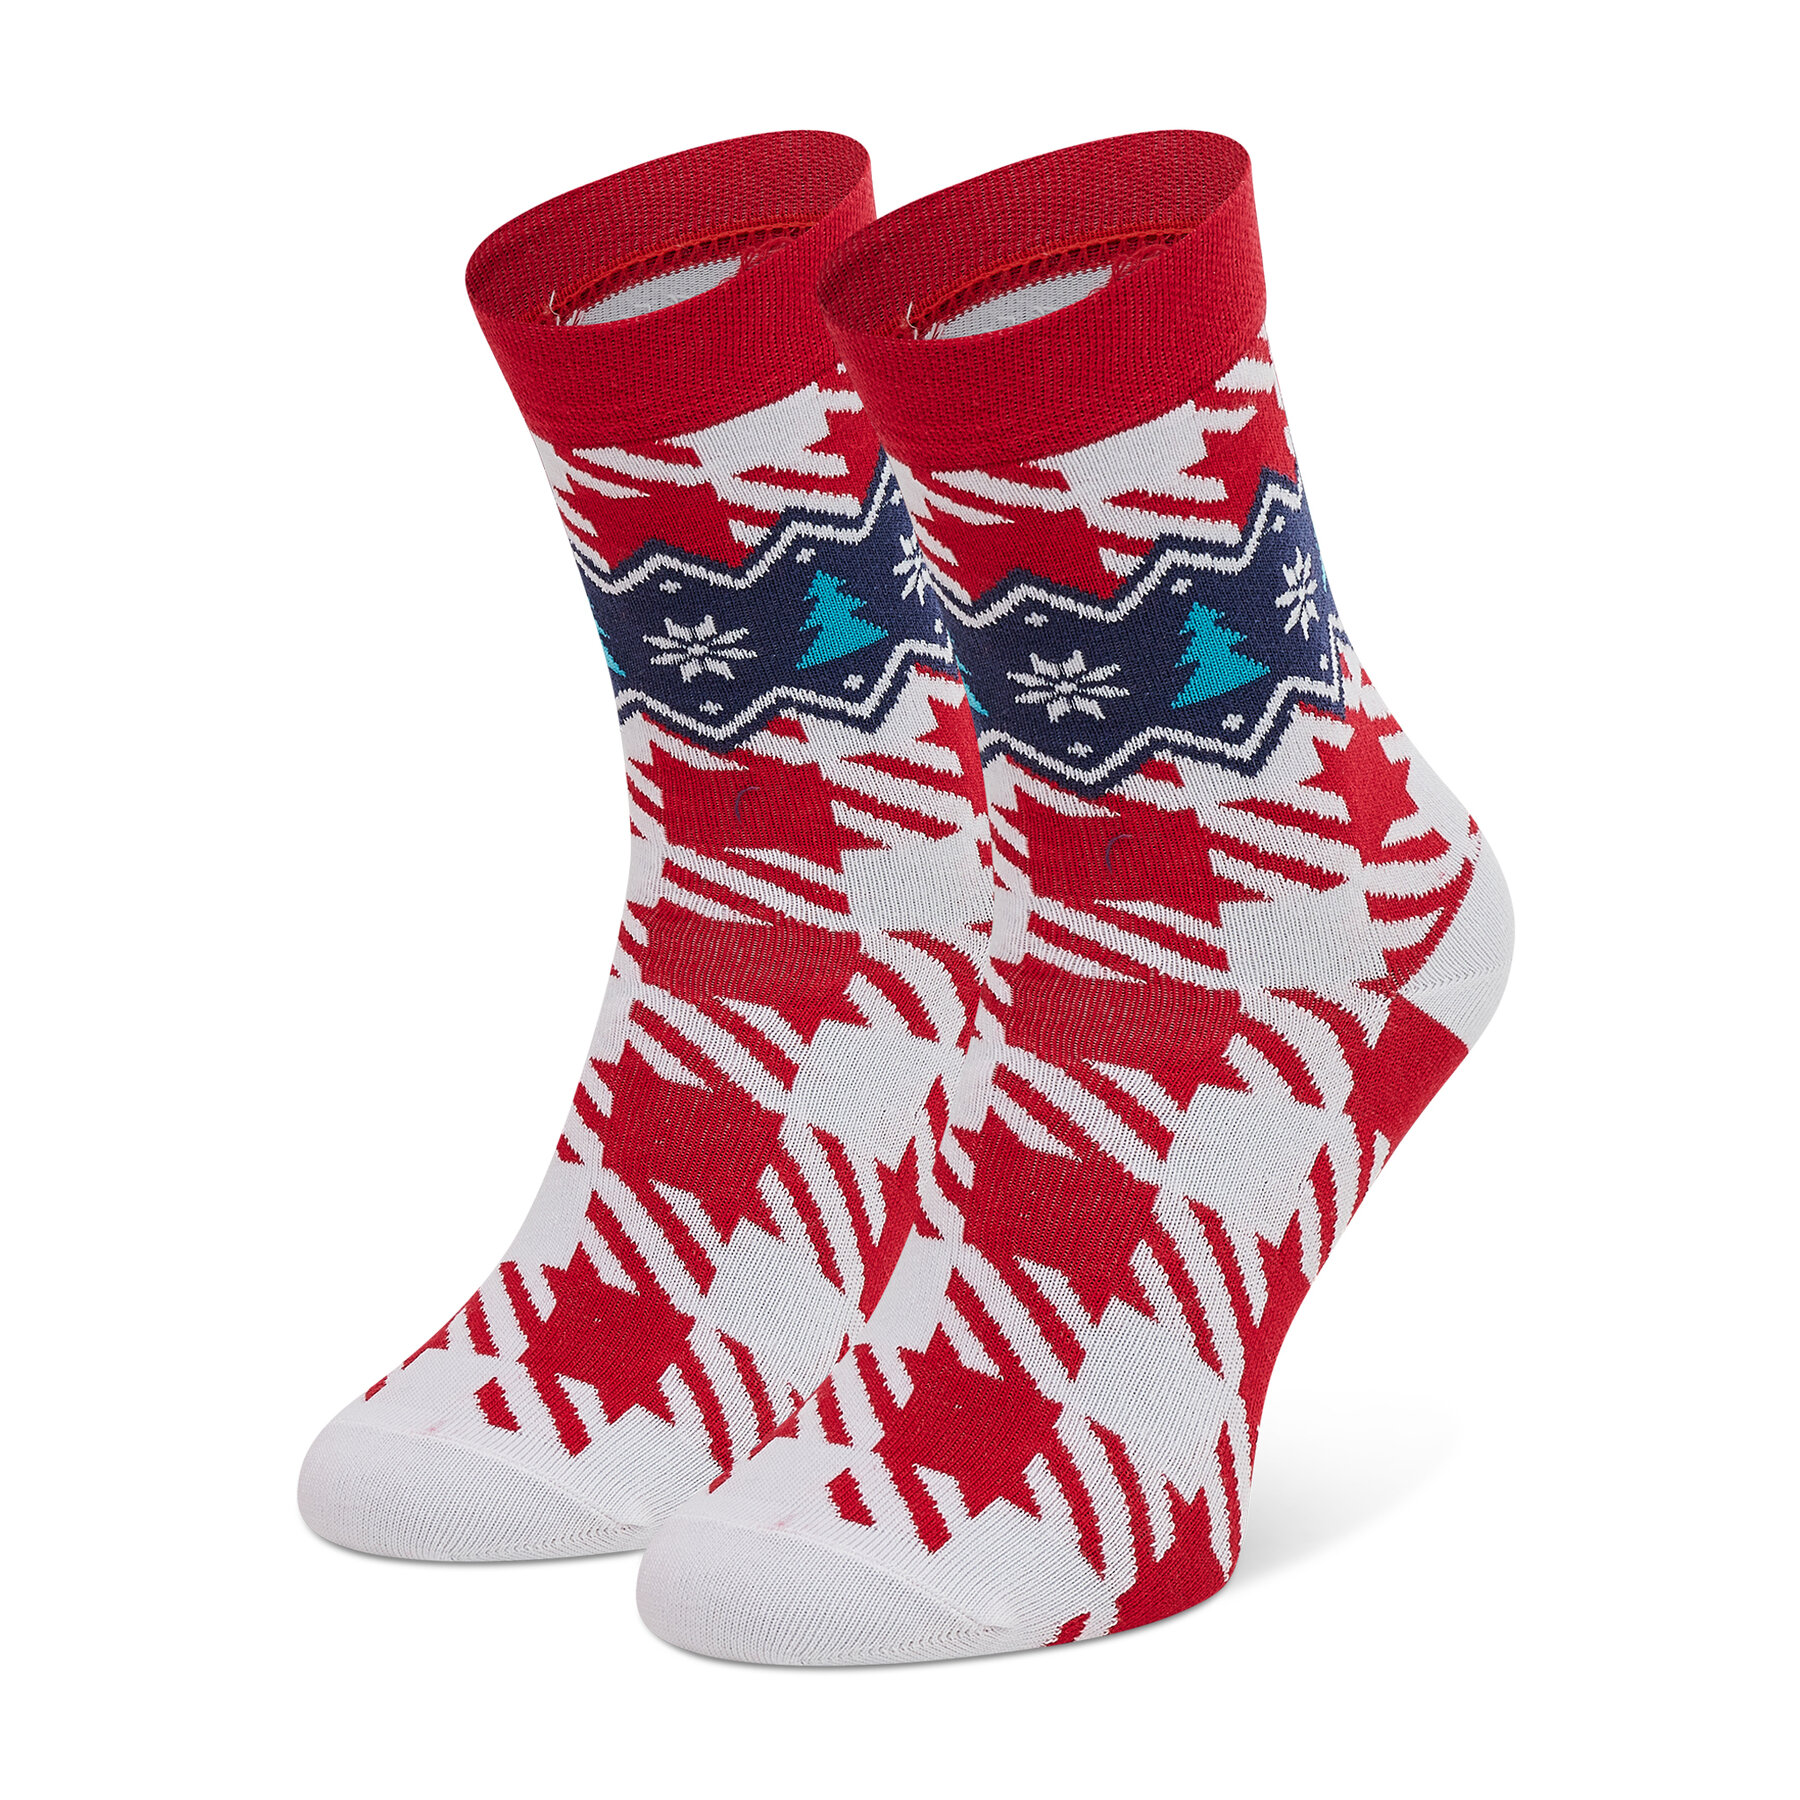 Chaussettes hautes femme Freakers LDSWI-RWH Rouge